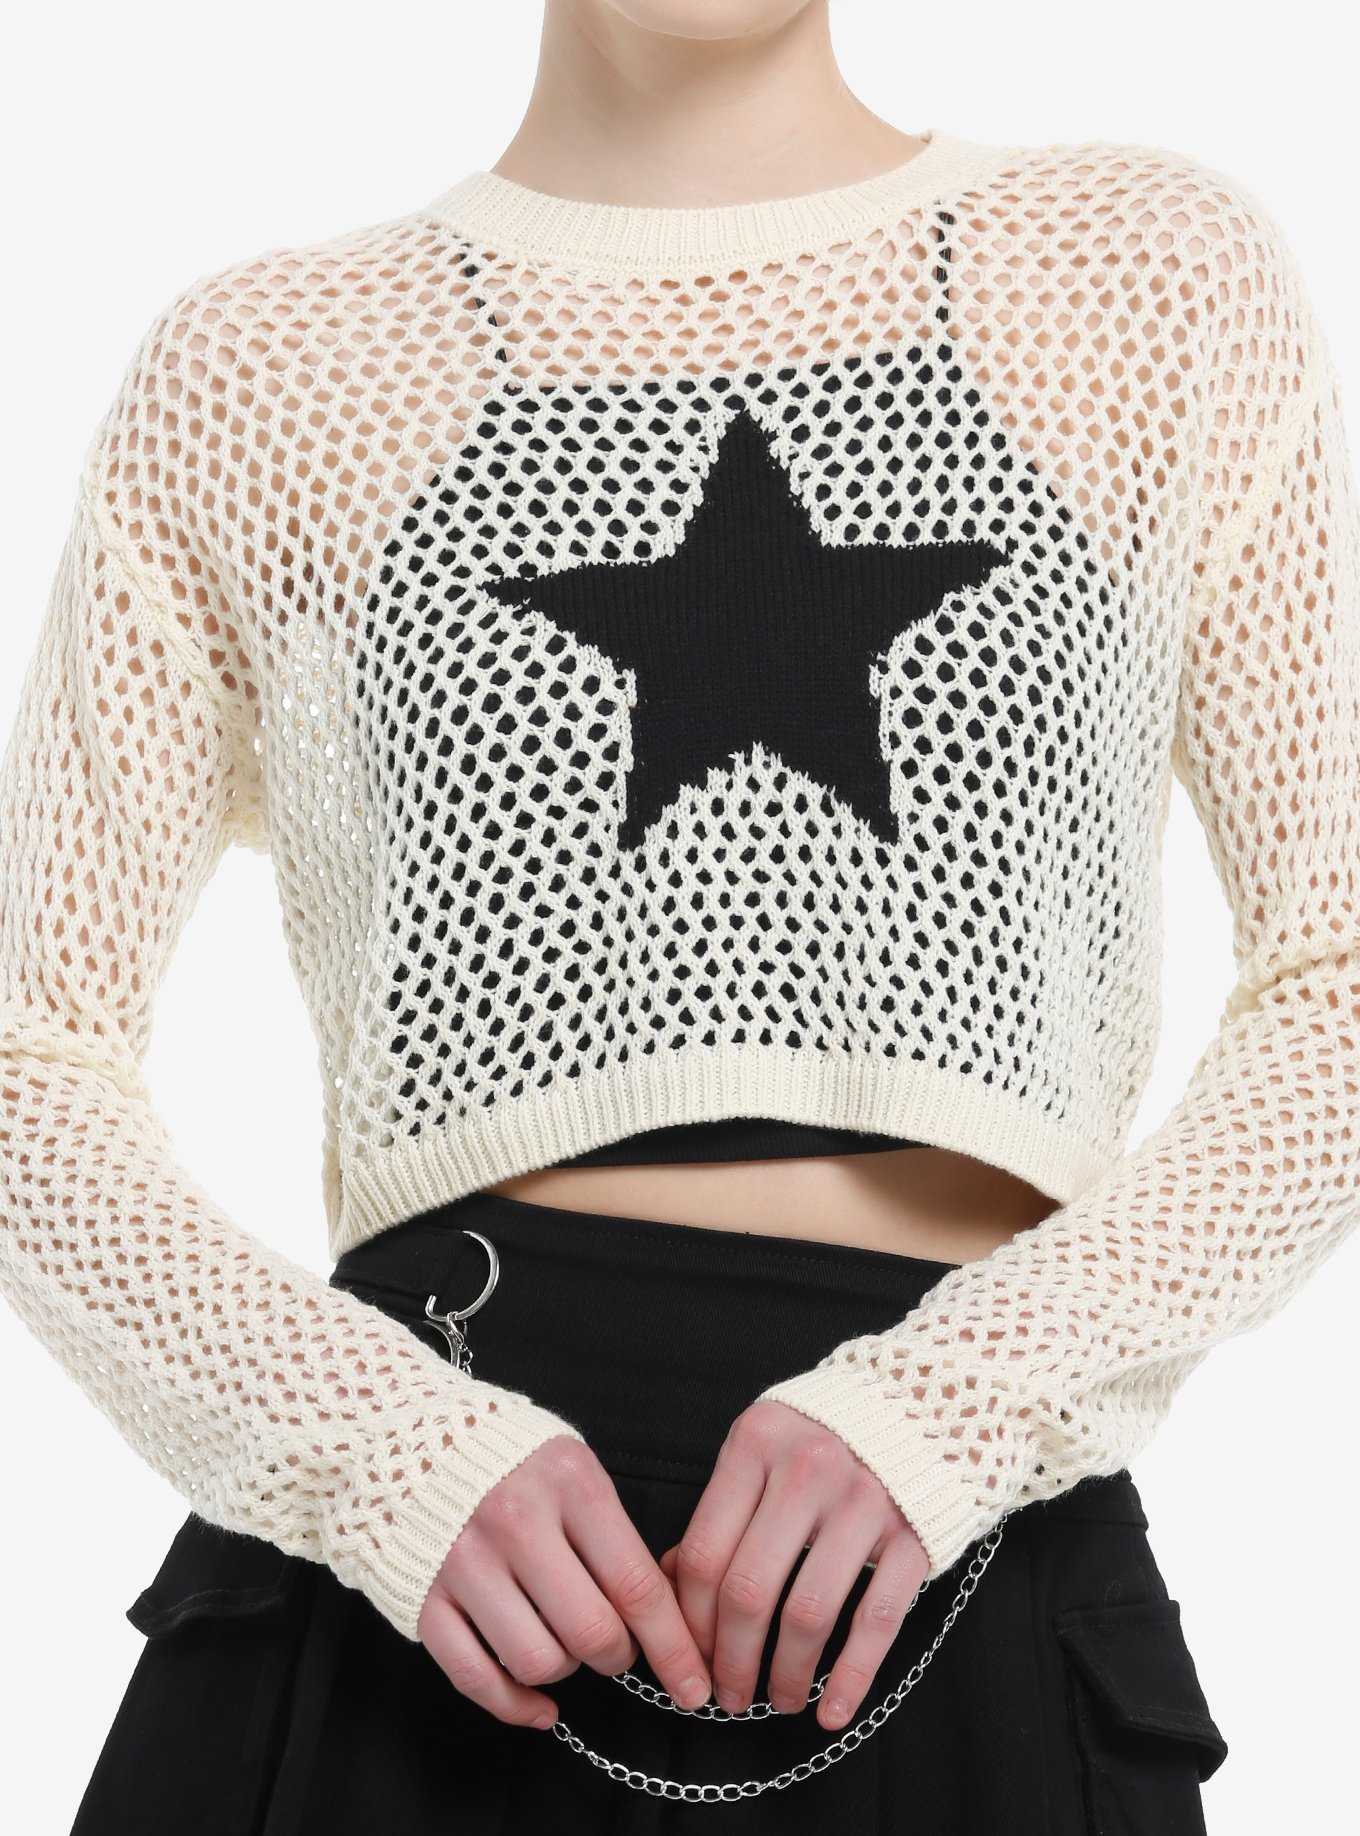 Social Collision Star Open Knit Girls Crop Sweater, , hi-res